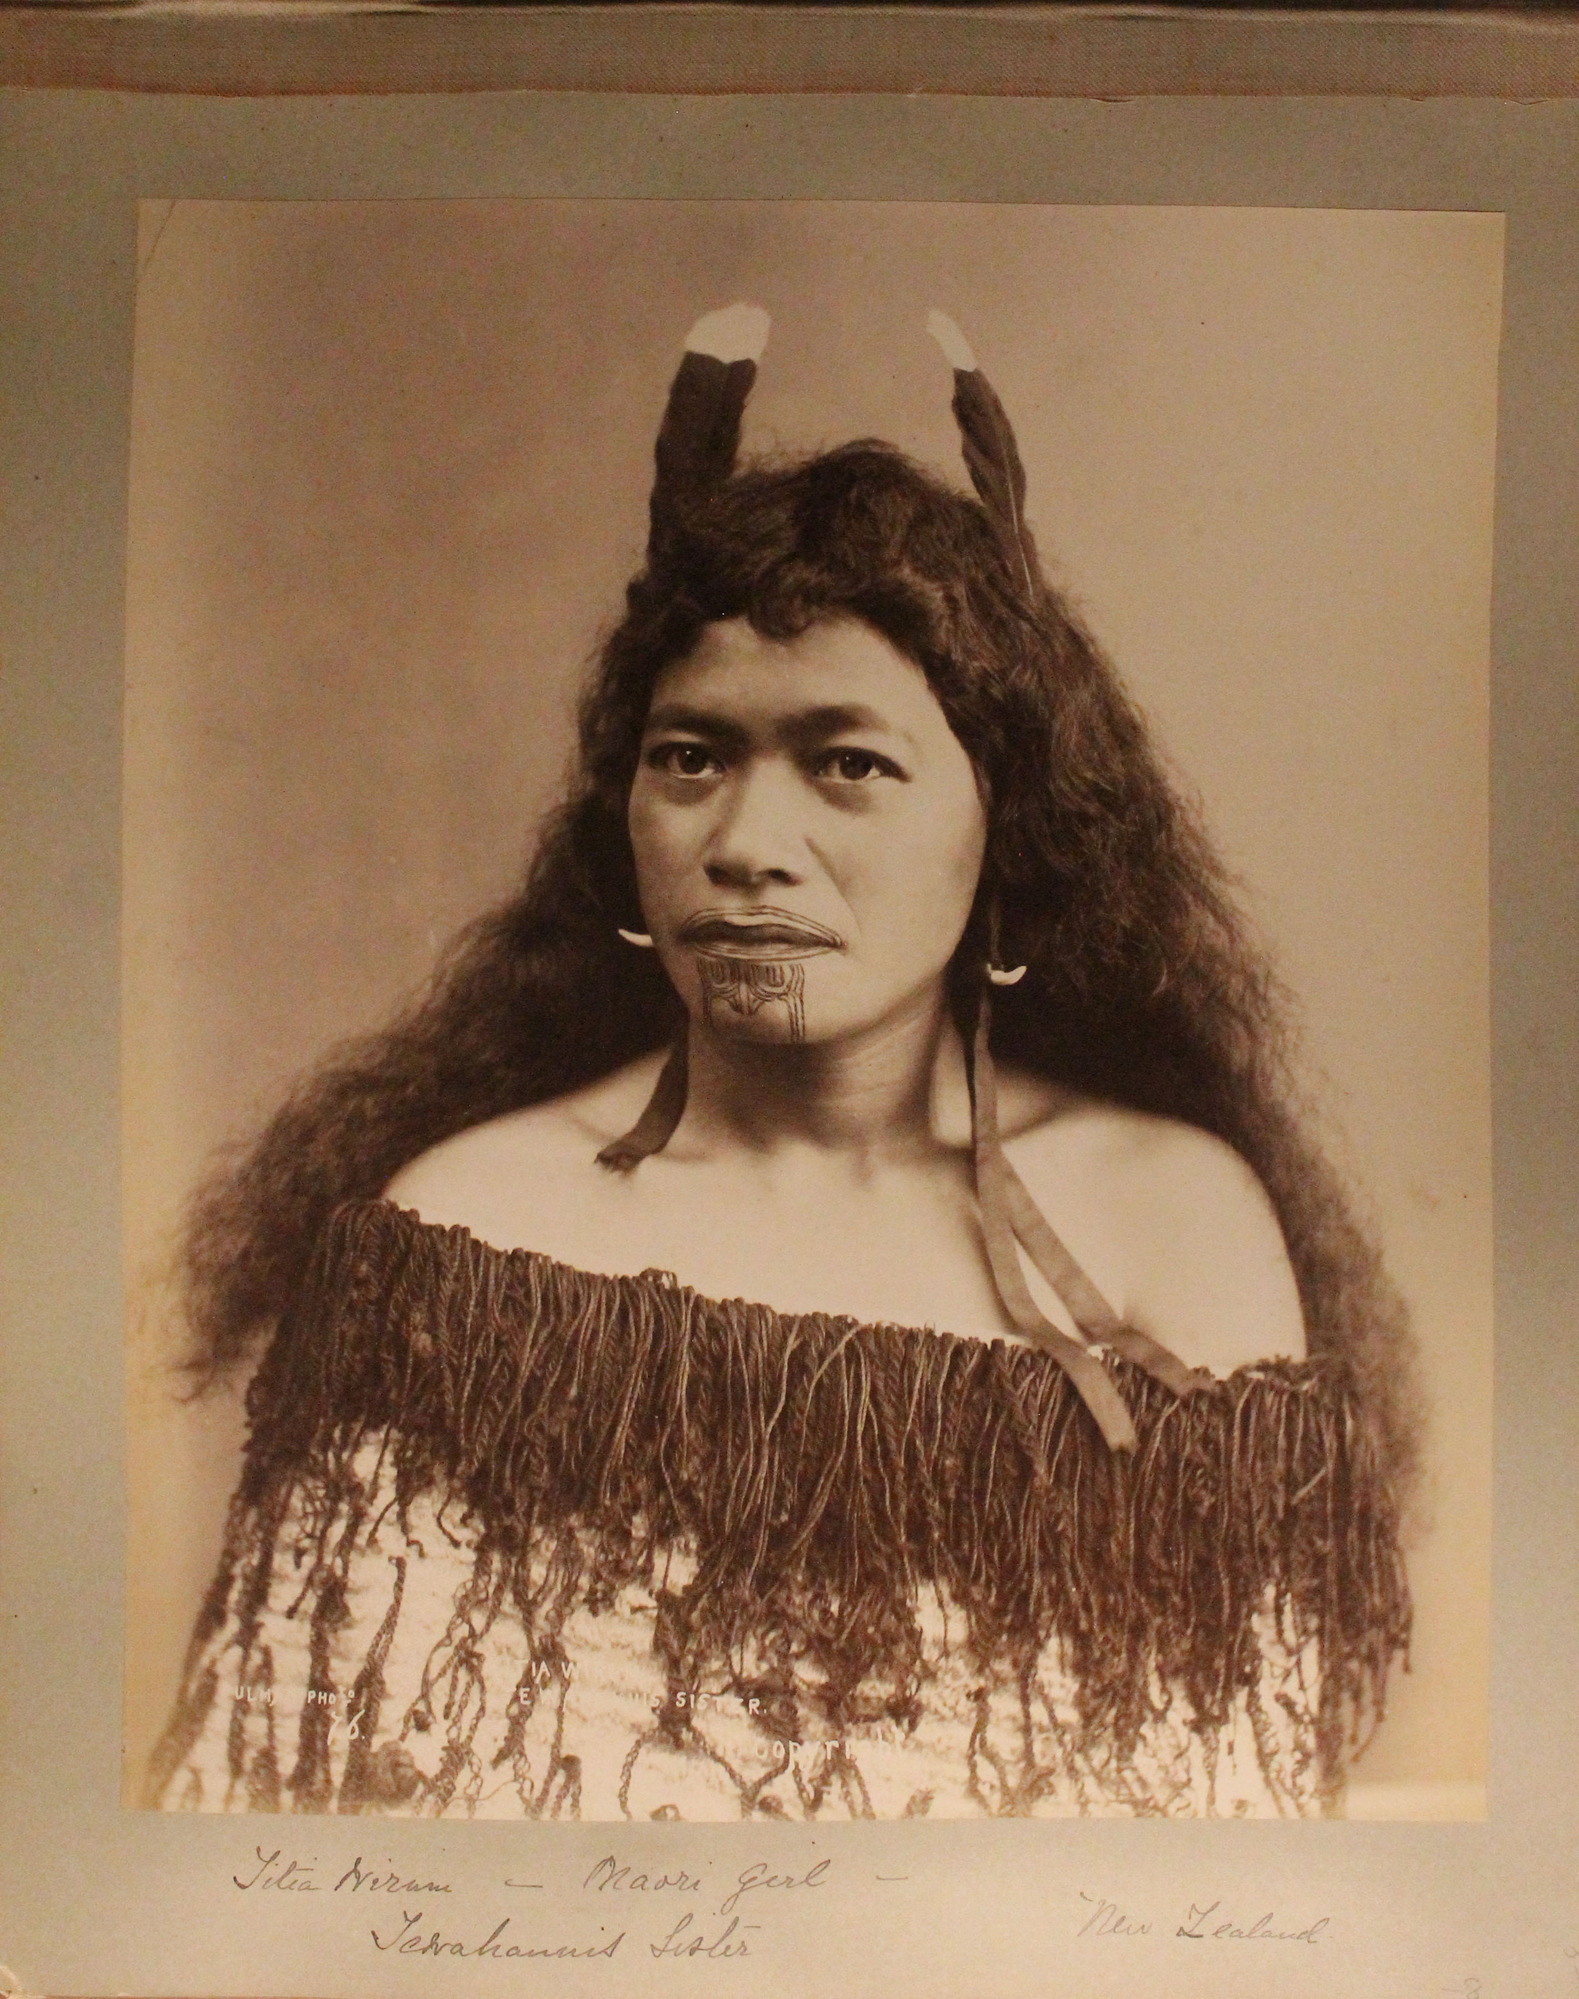 Portrait of Maori girl in traditional outfit with tattoos on her chin.